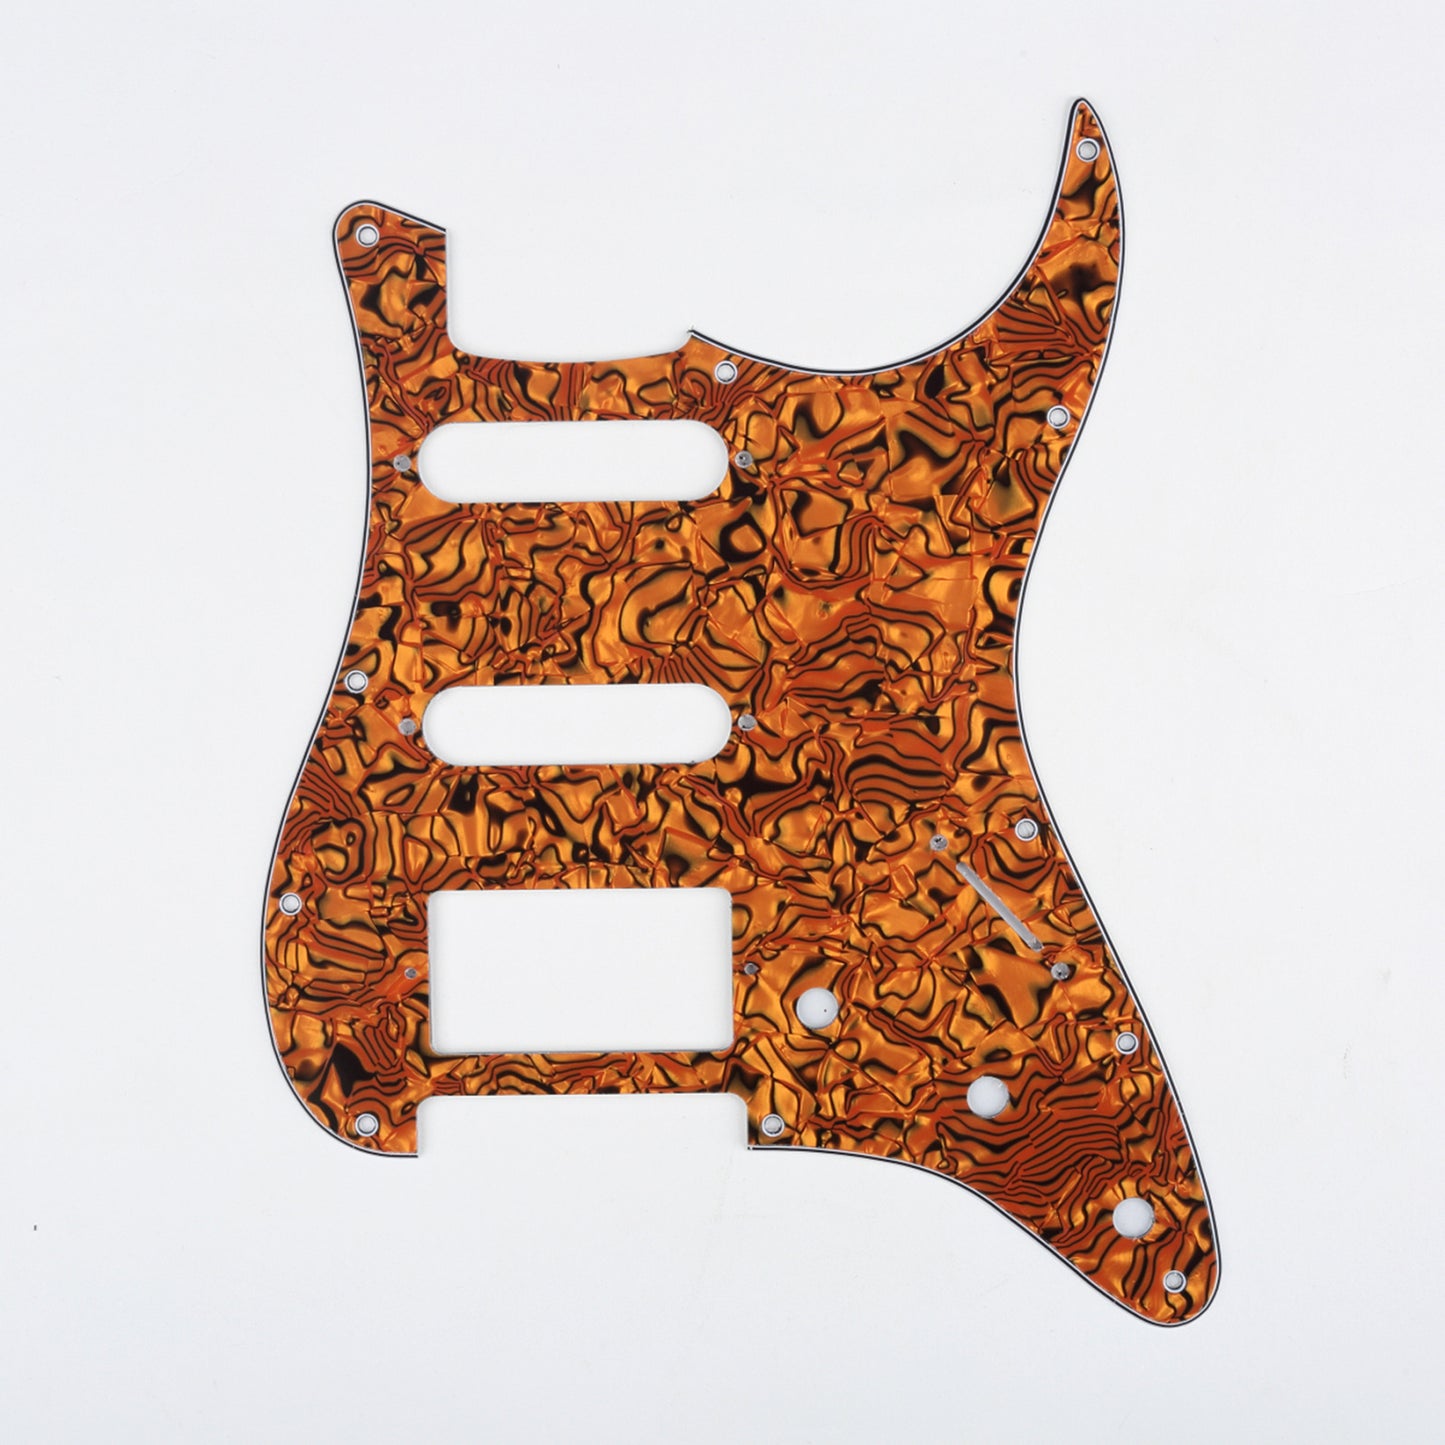 Musiclily HSS 11 Hole Guitar Strat Pickguard for Fender USA/Mexican Made Standard Stratocaster Modern Style,  4Ply Tiger Spot Shell